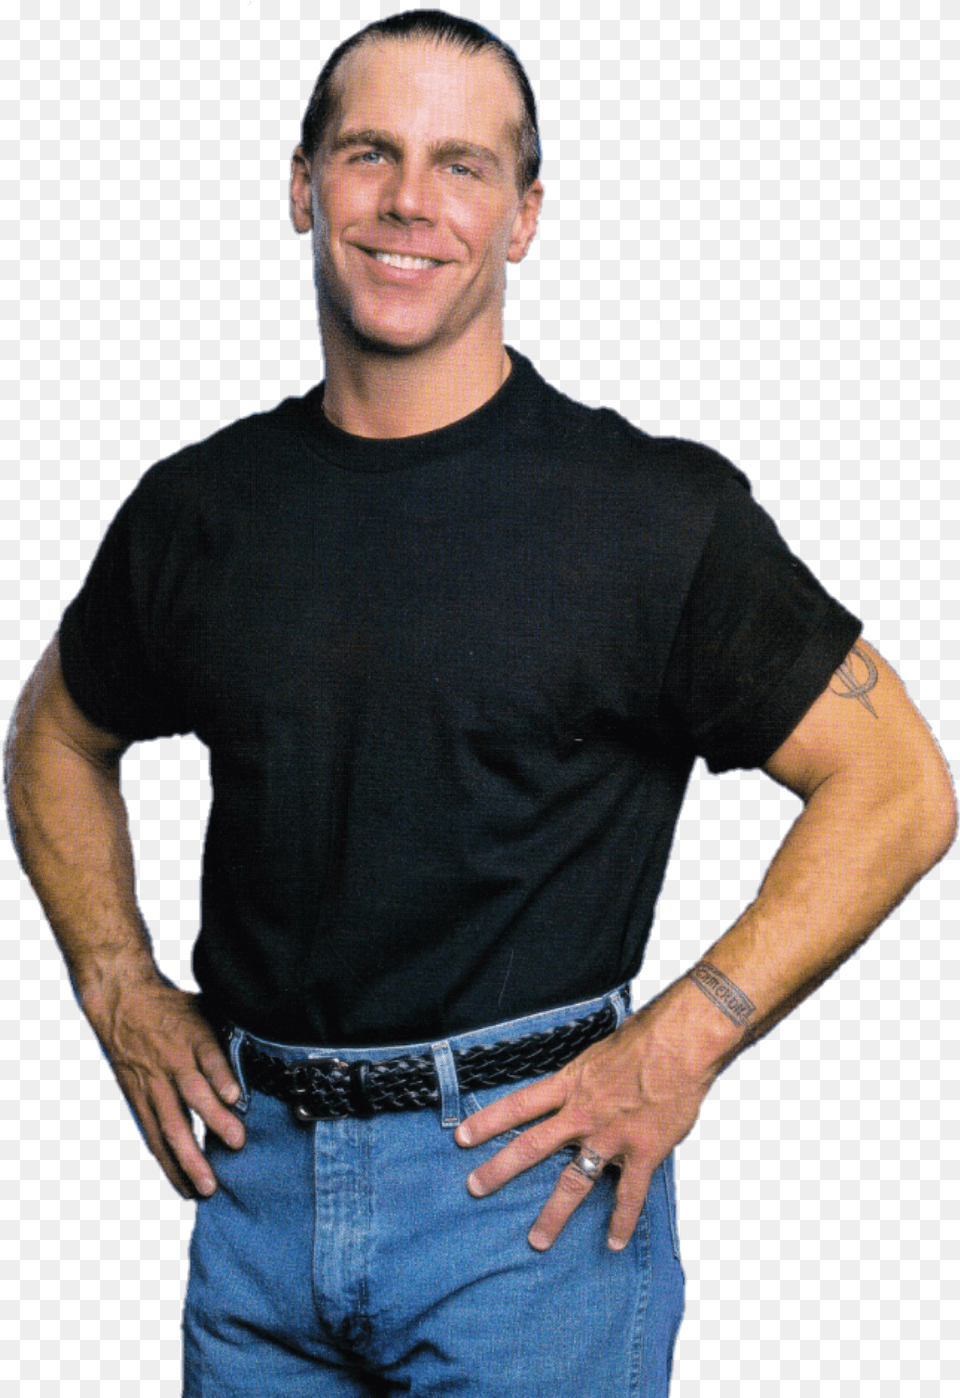 Wwe Shawn Michaels Shawn Michaels, Accessories, Pants, Jeans, T-shirt Png